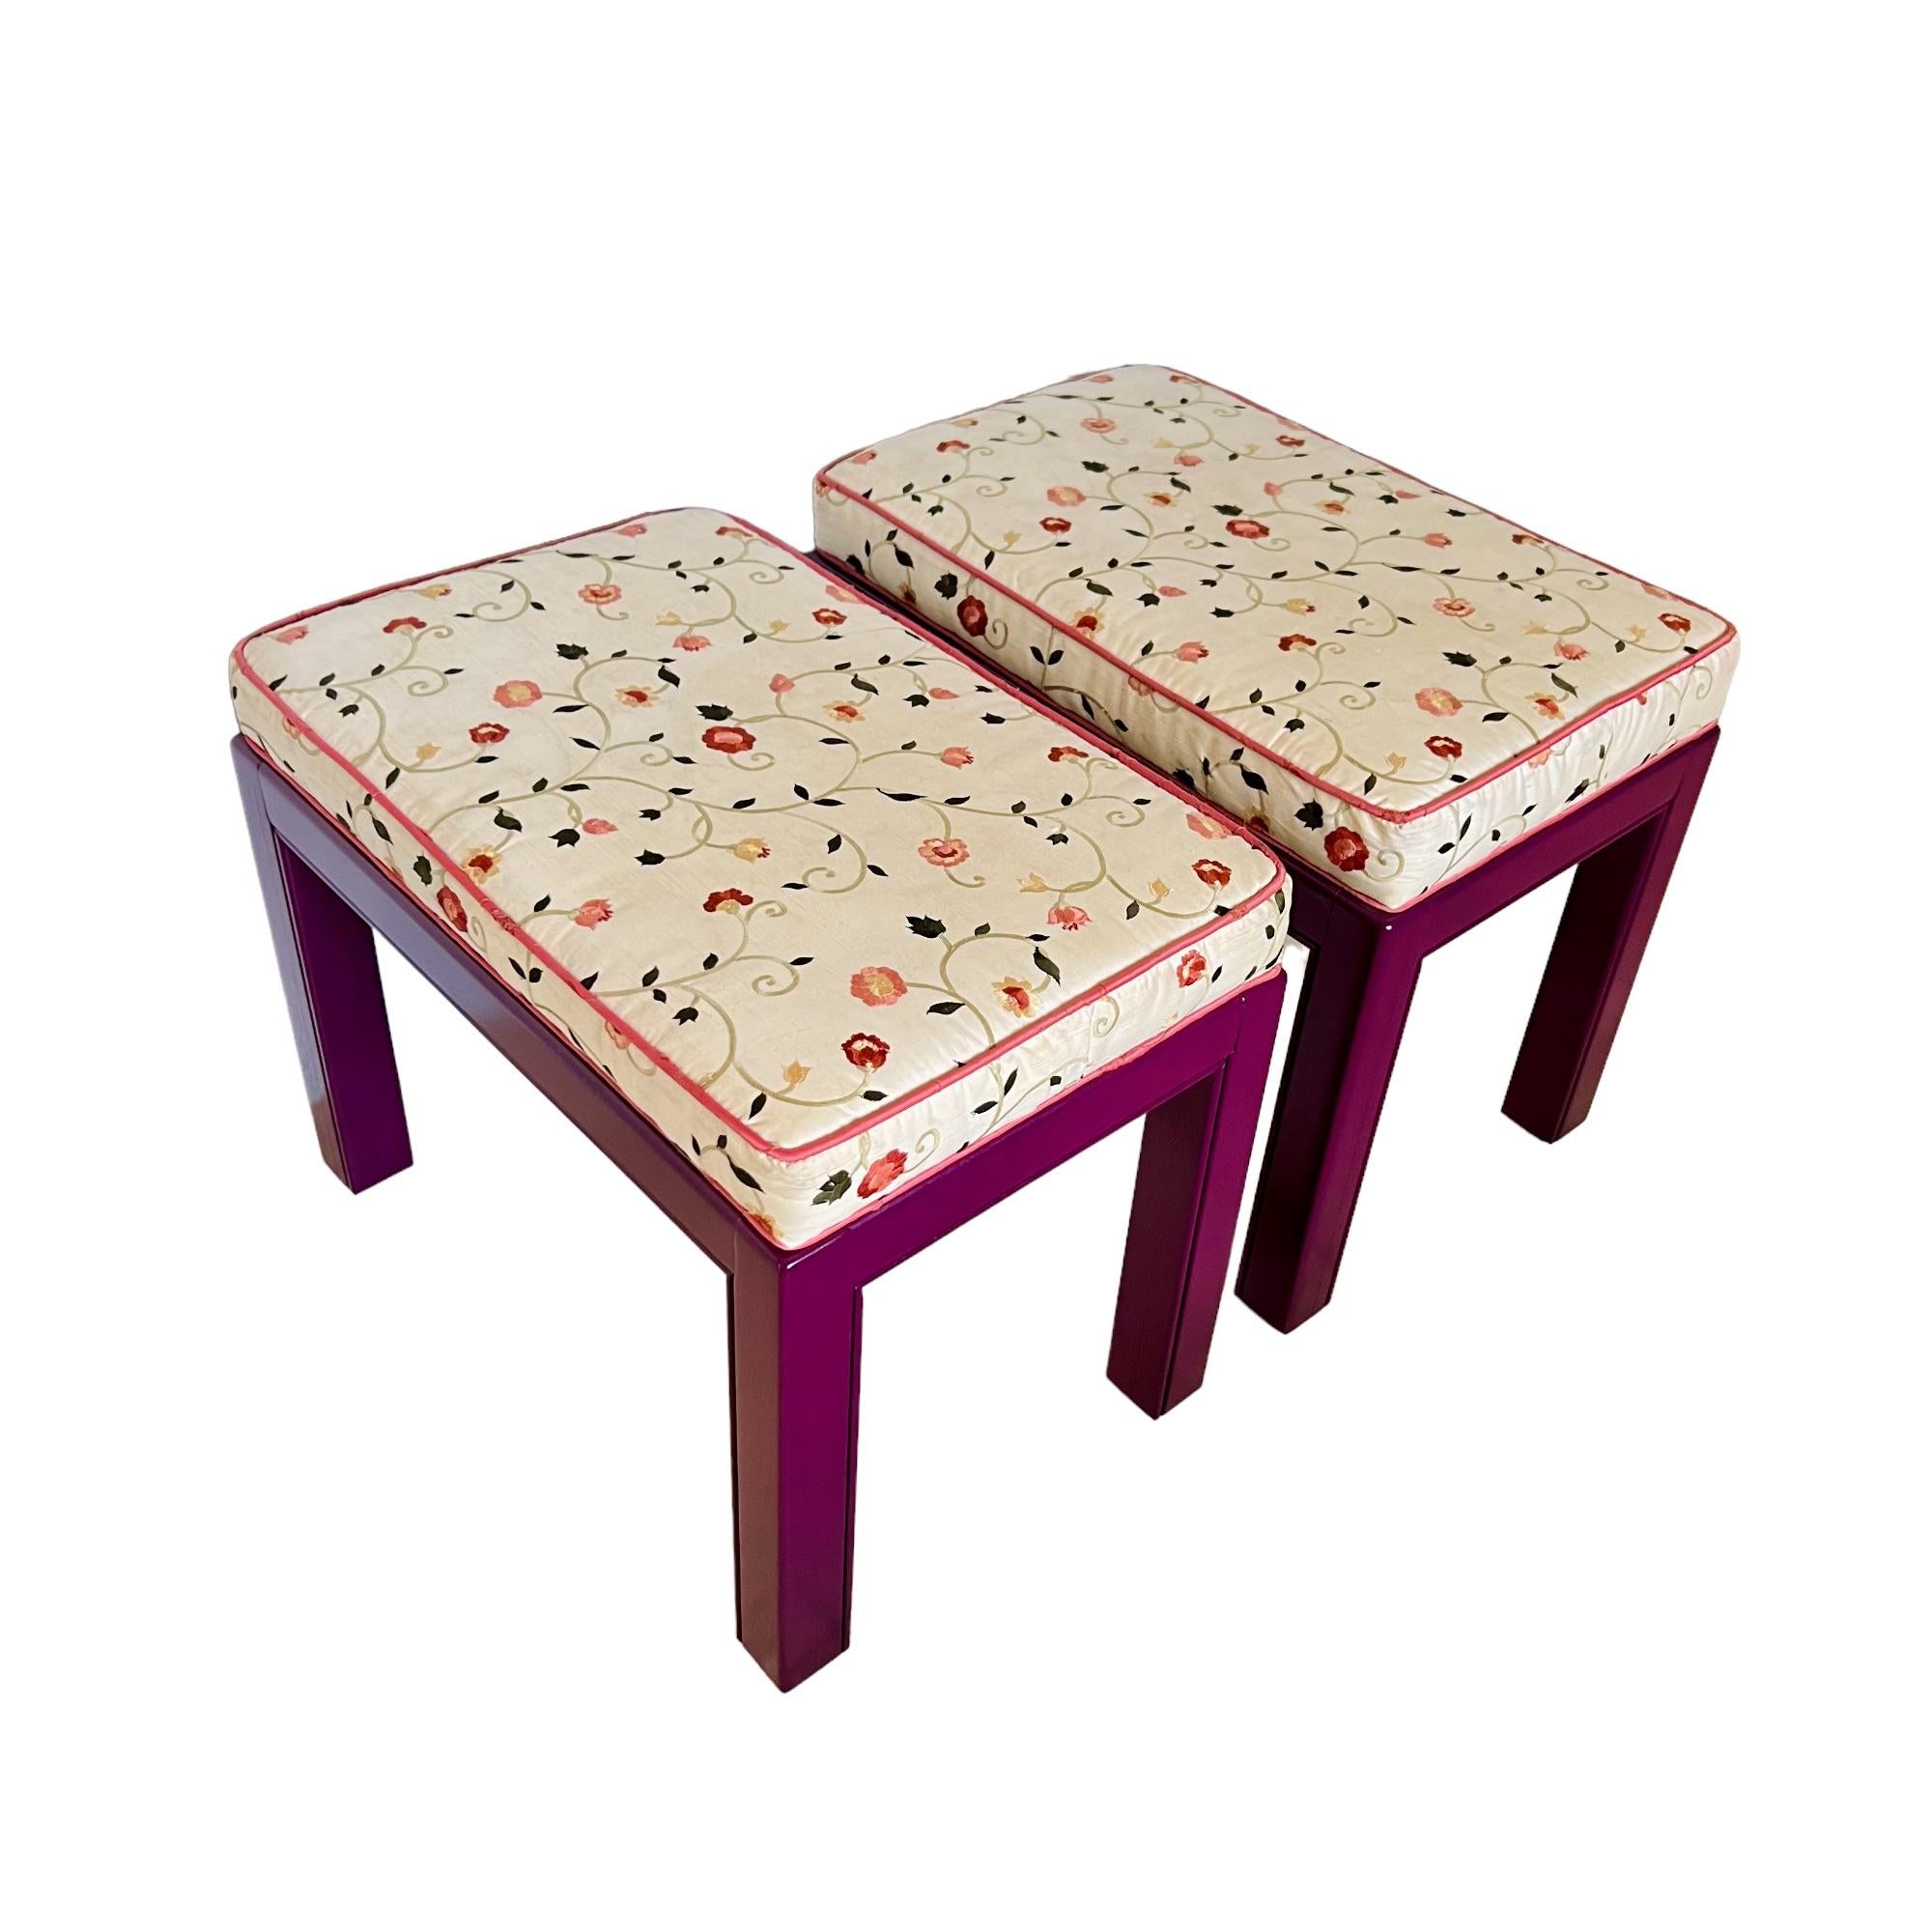 American Drexel Chippendale Upholstered Aubergine Benches, a Pair